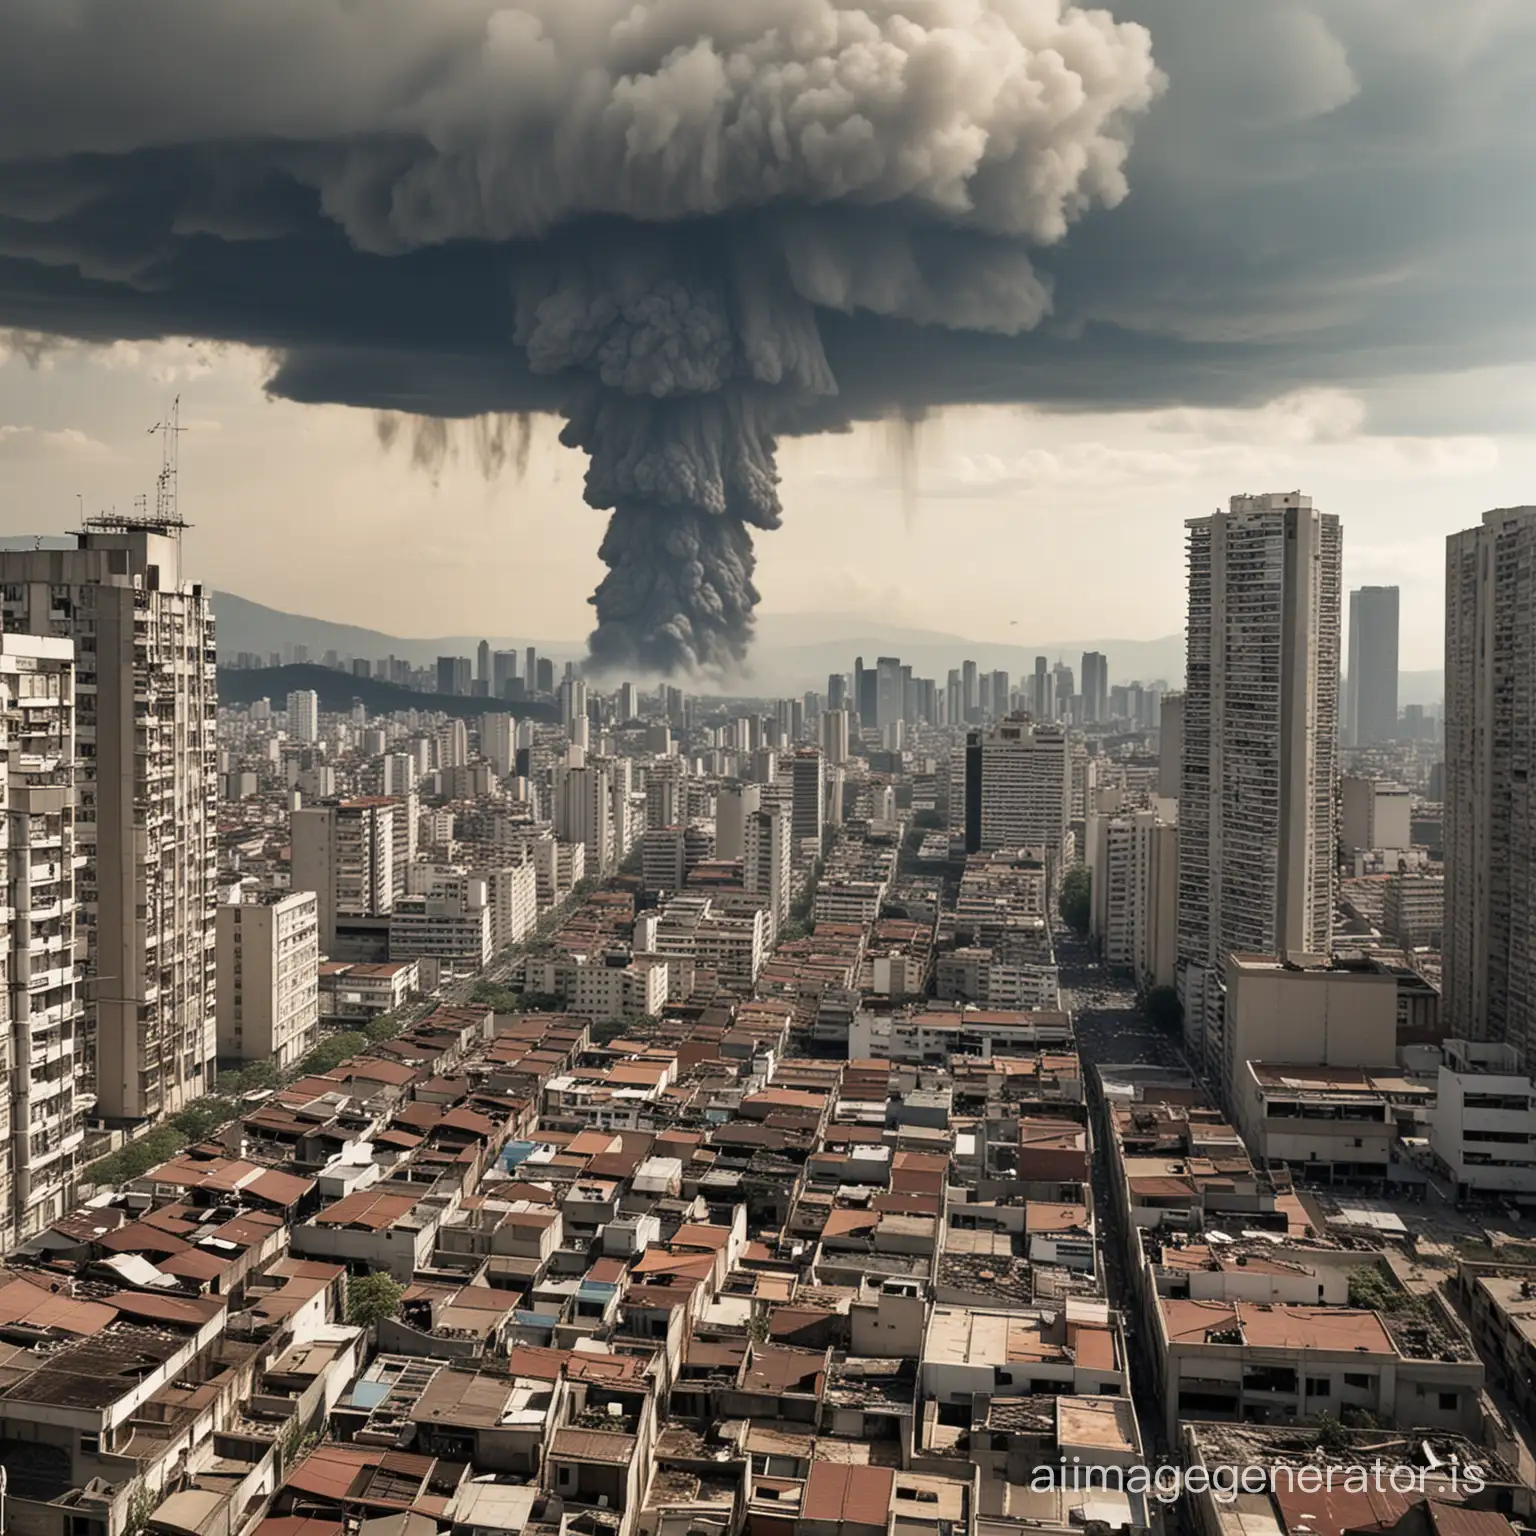 So-Paulo-City-Devastated-by-Nuclear-Blast-A-PostApocalyptic-Landscape